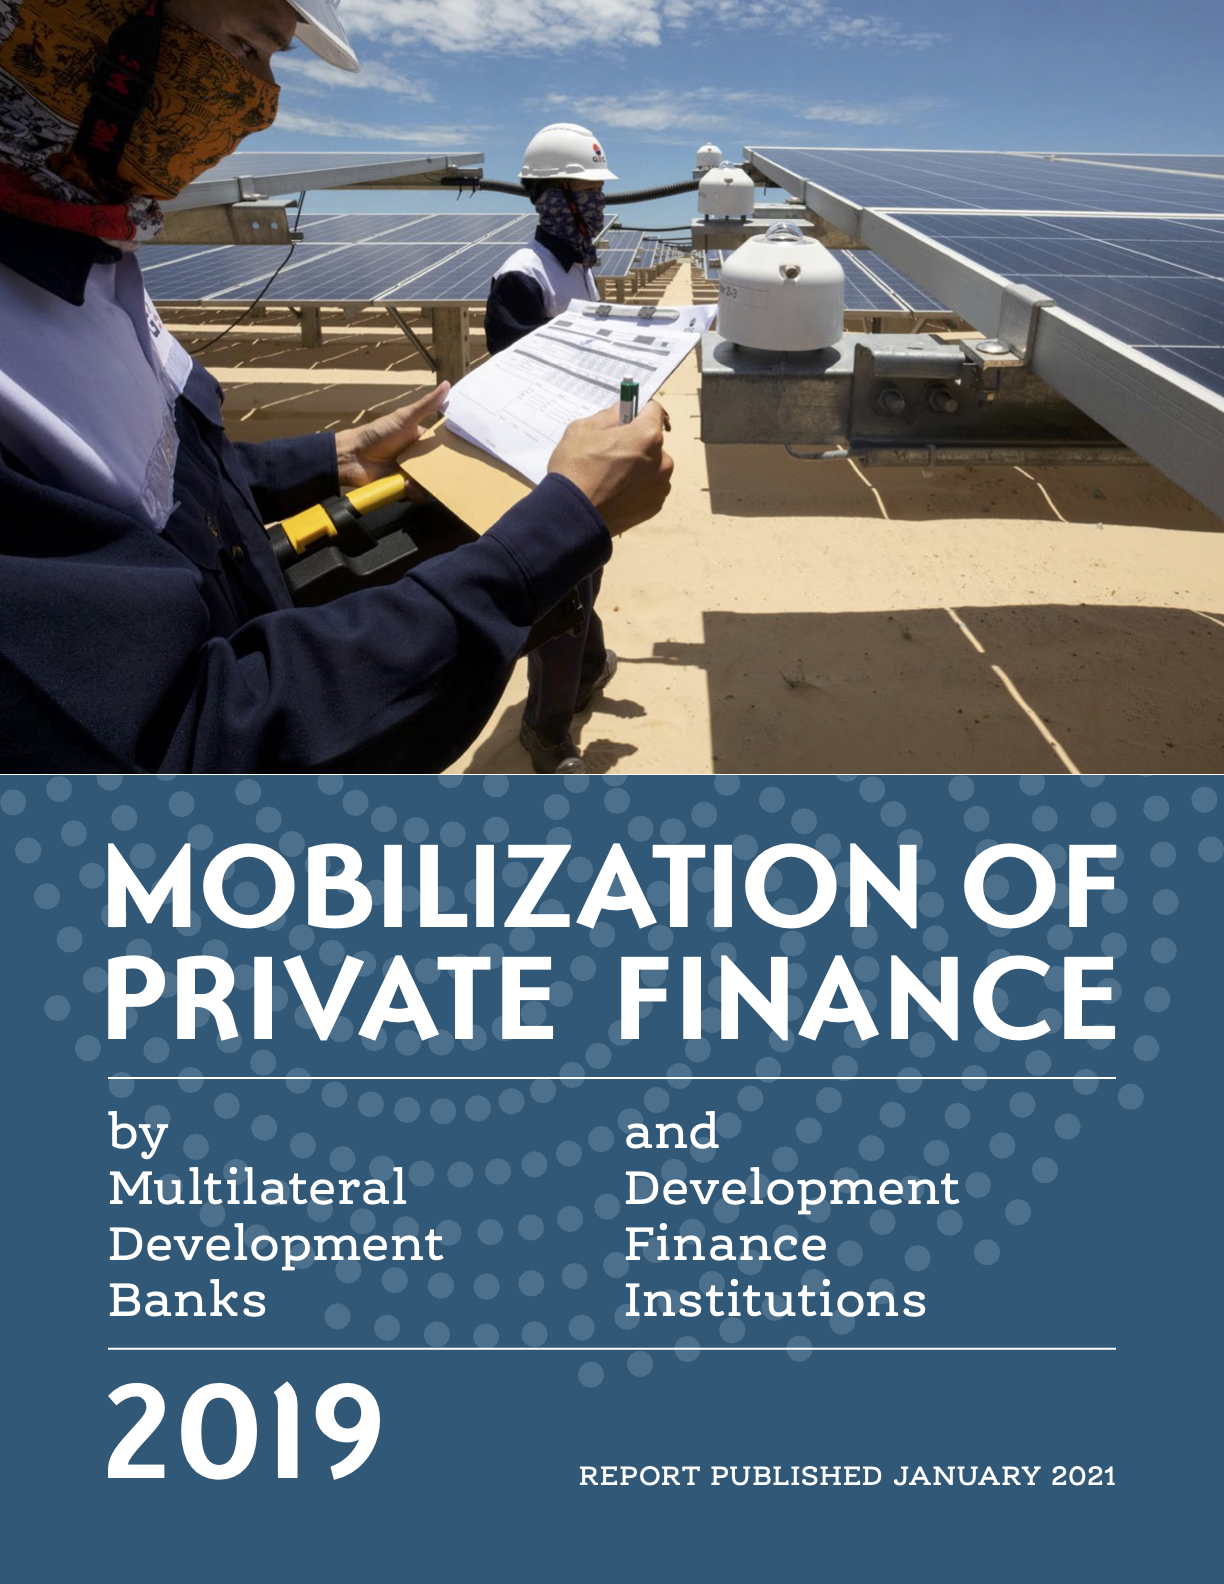 Mobilization of private finance by MDBs and DFIs 2019